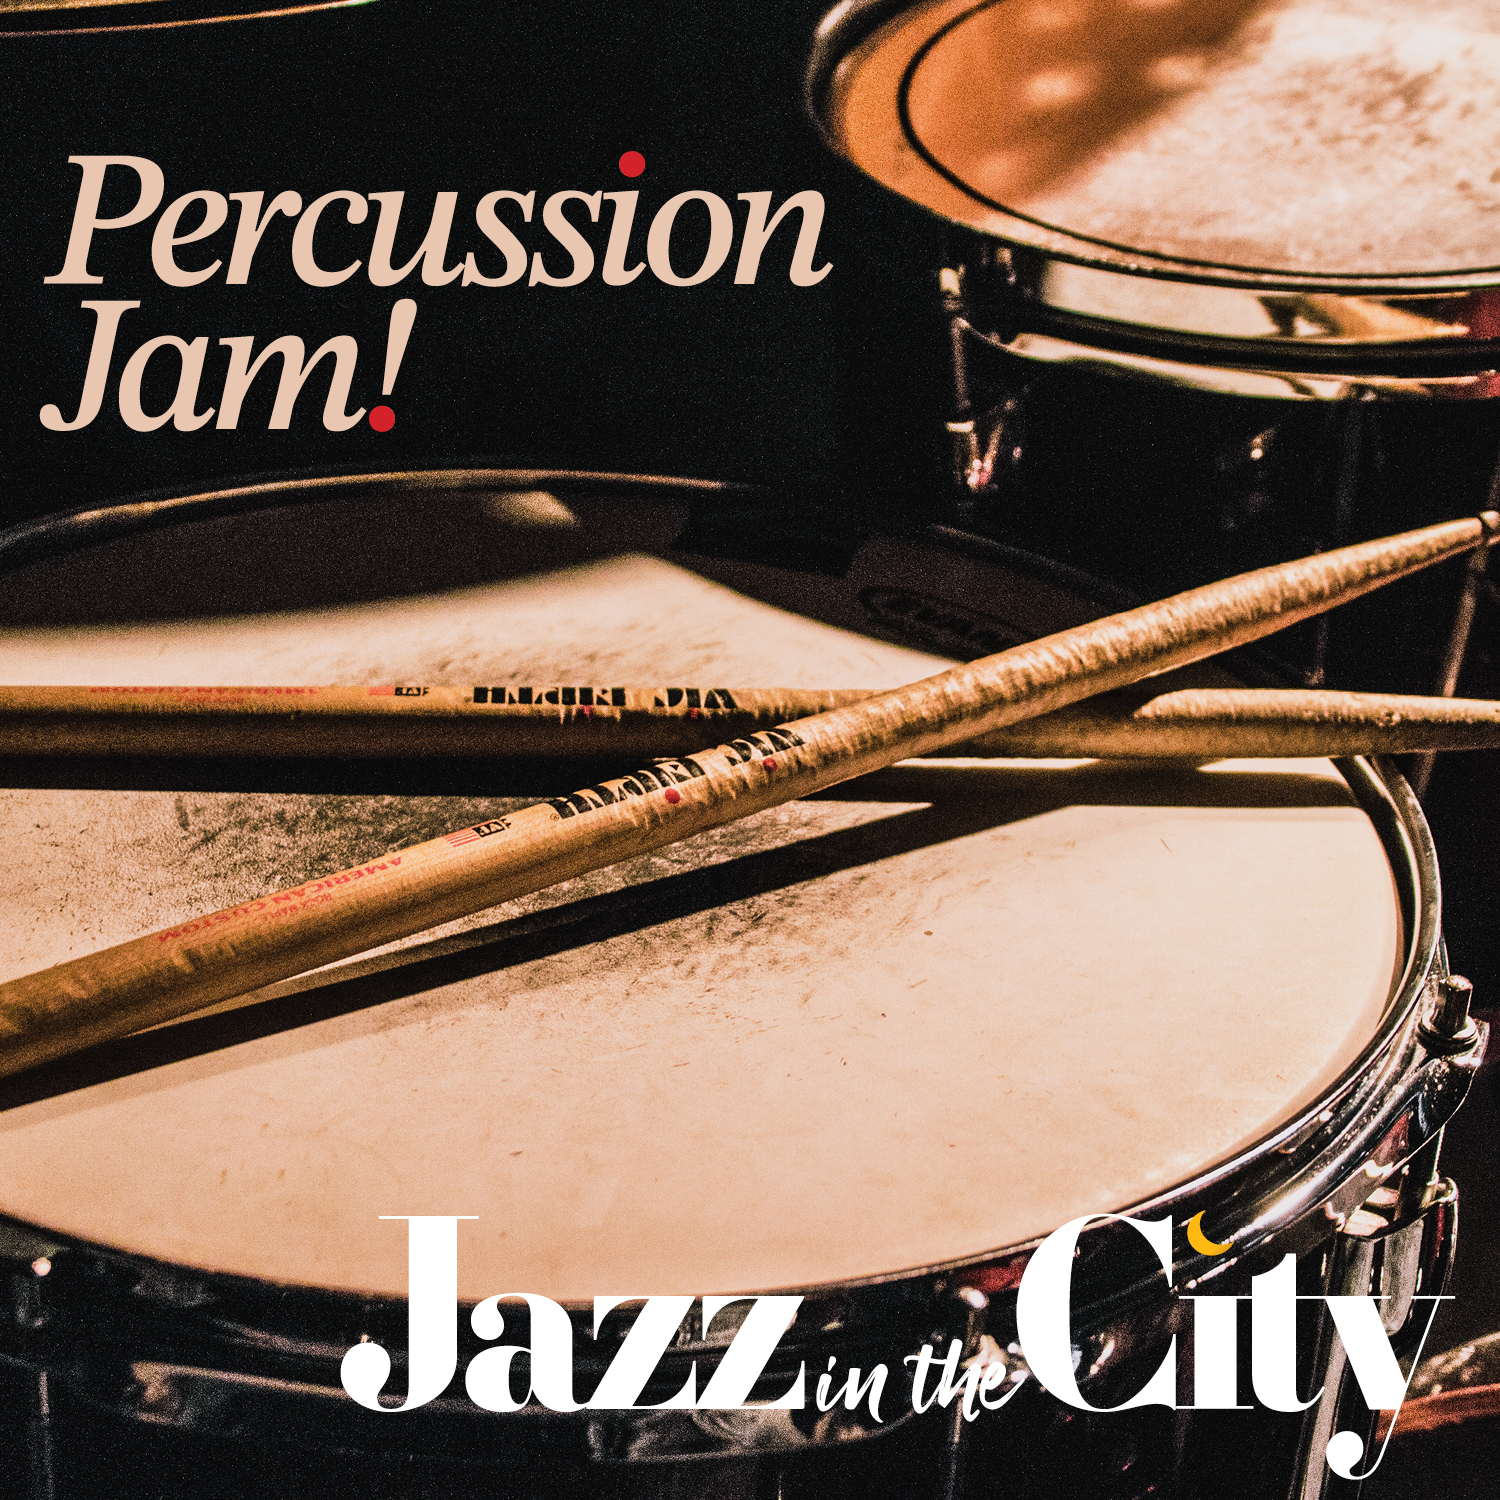 Image for Jazz in the City – Percussion Jam!